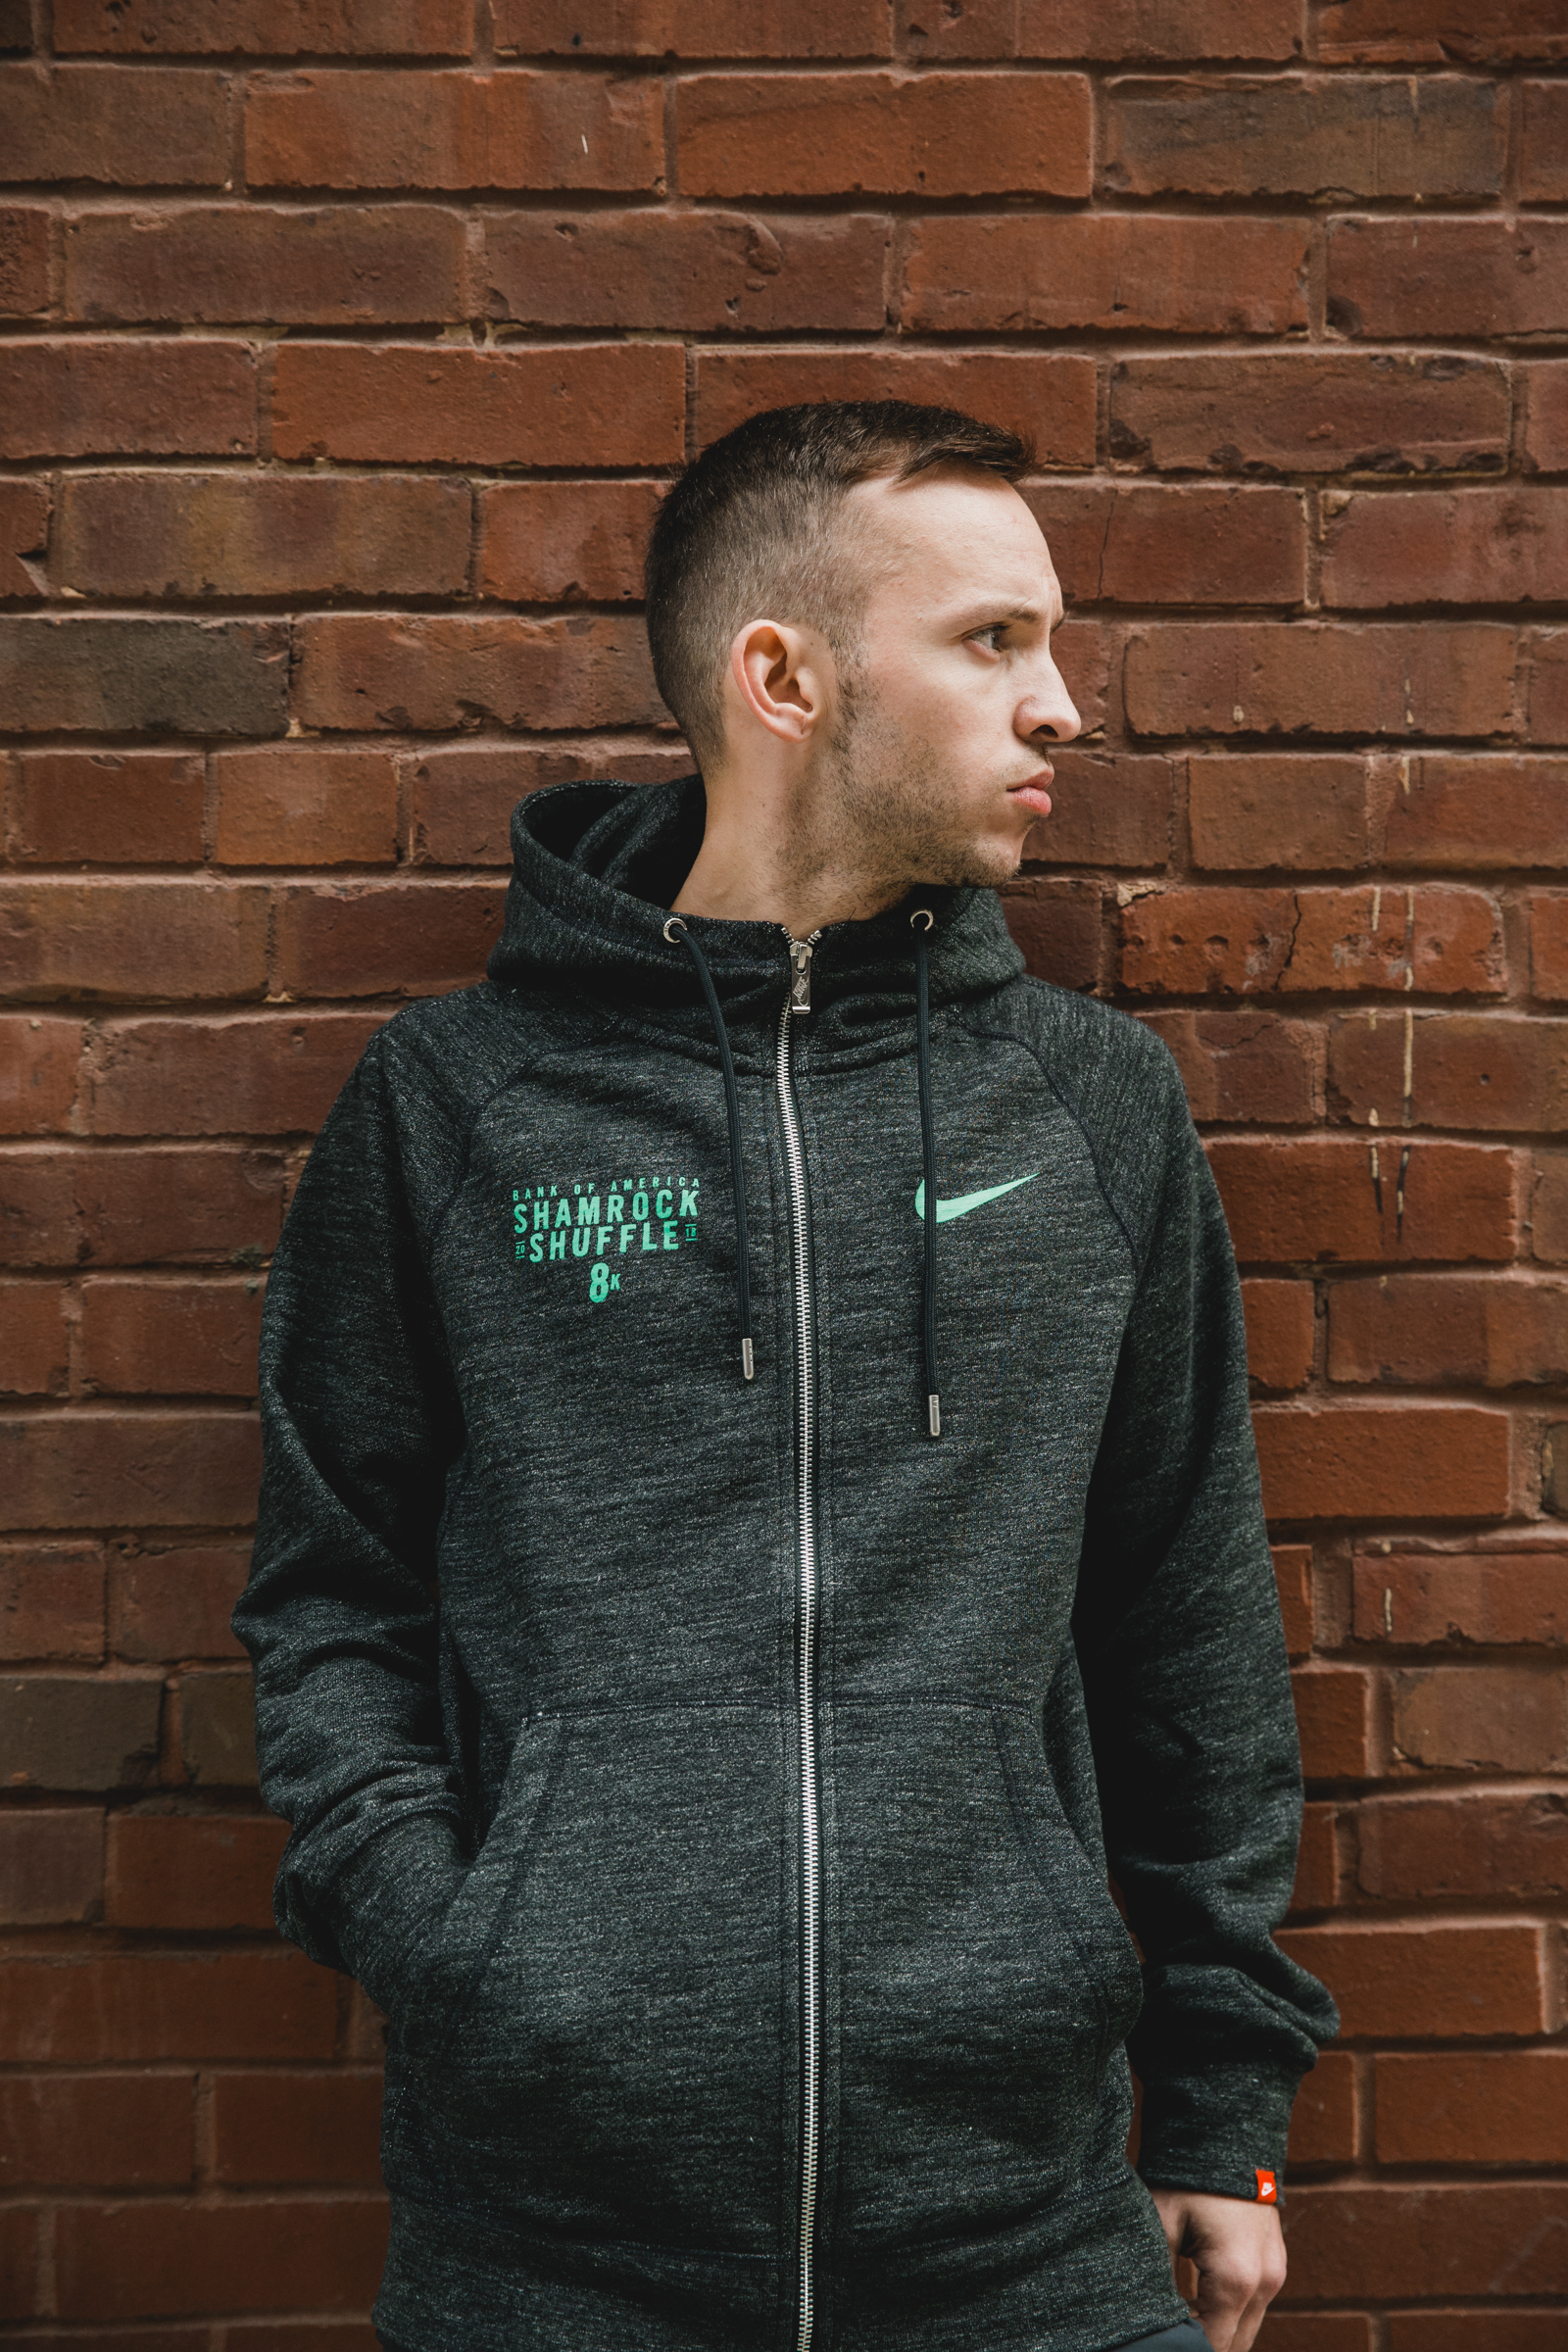 Your First Look Nike's Official Shamrock Shuffle 8K